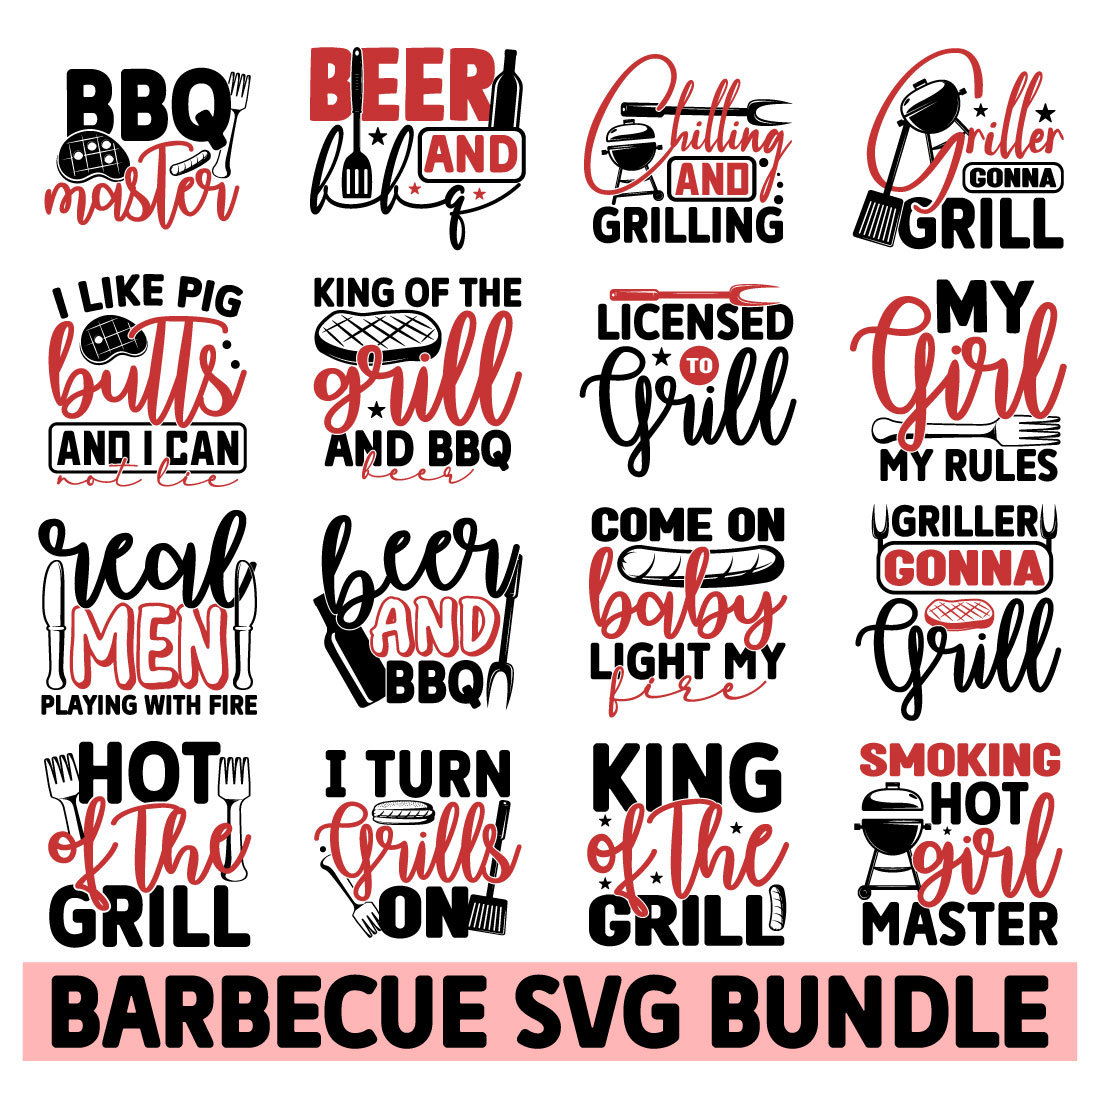 A collection of amazing images for prints on the theme of barbecue